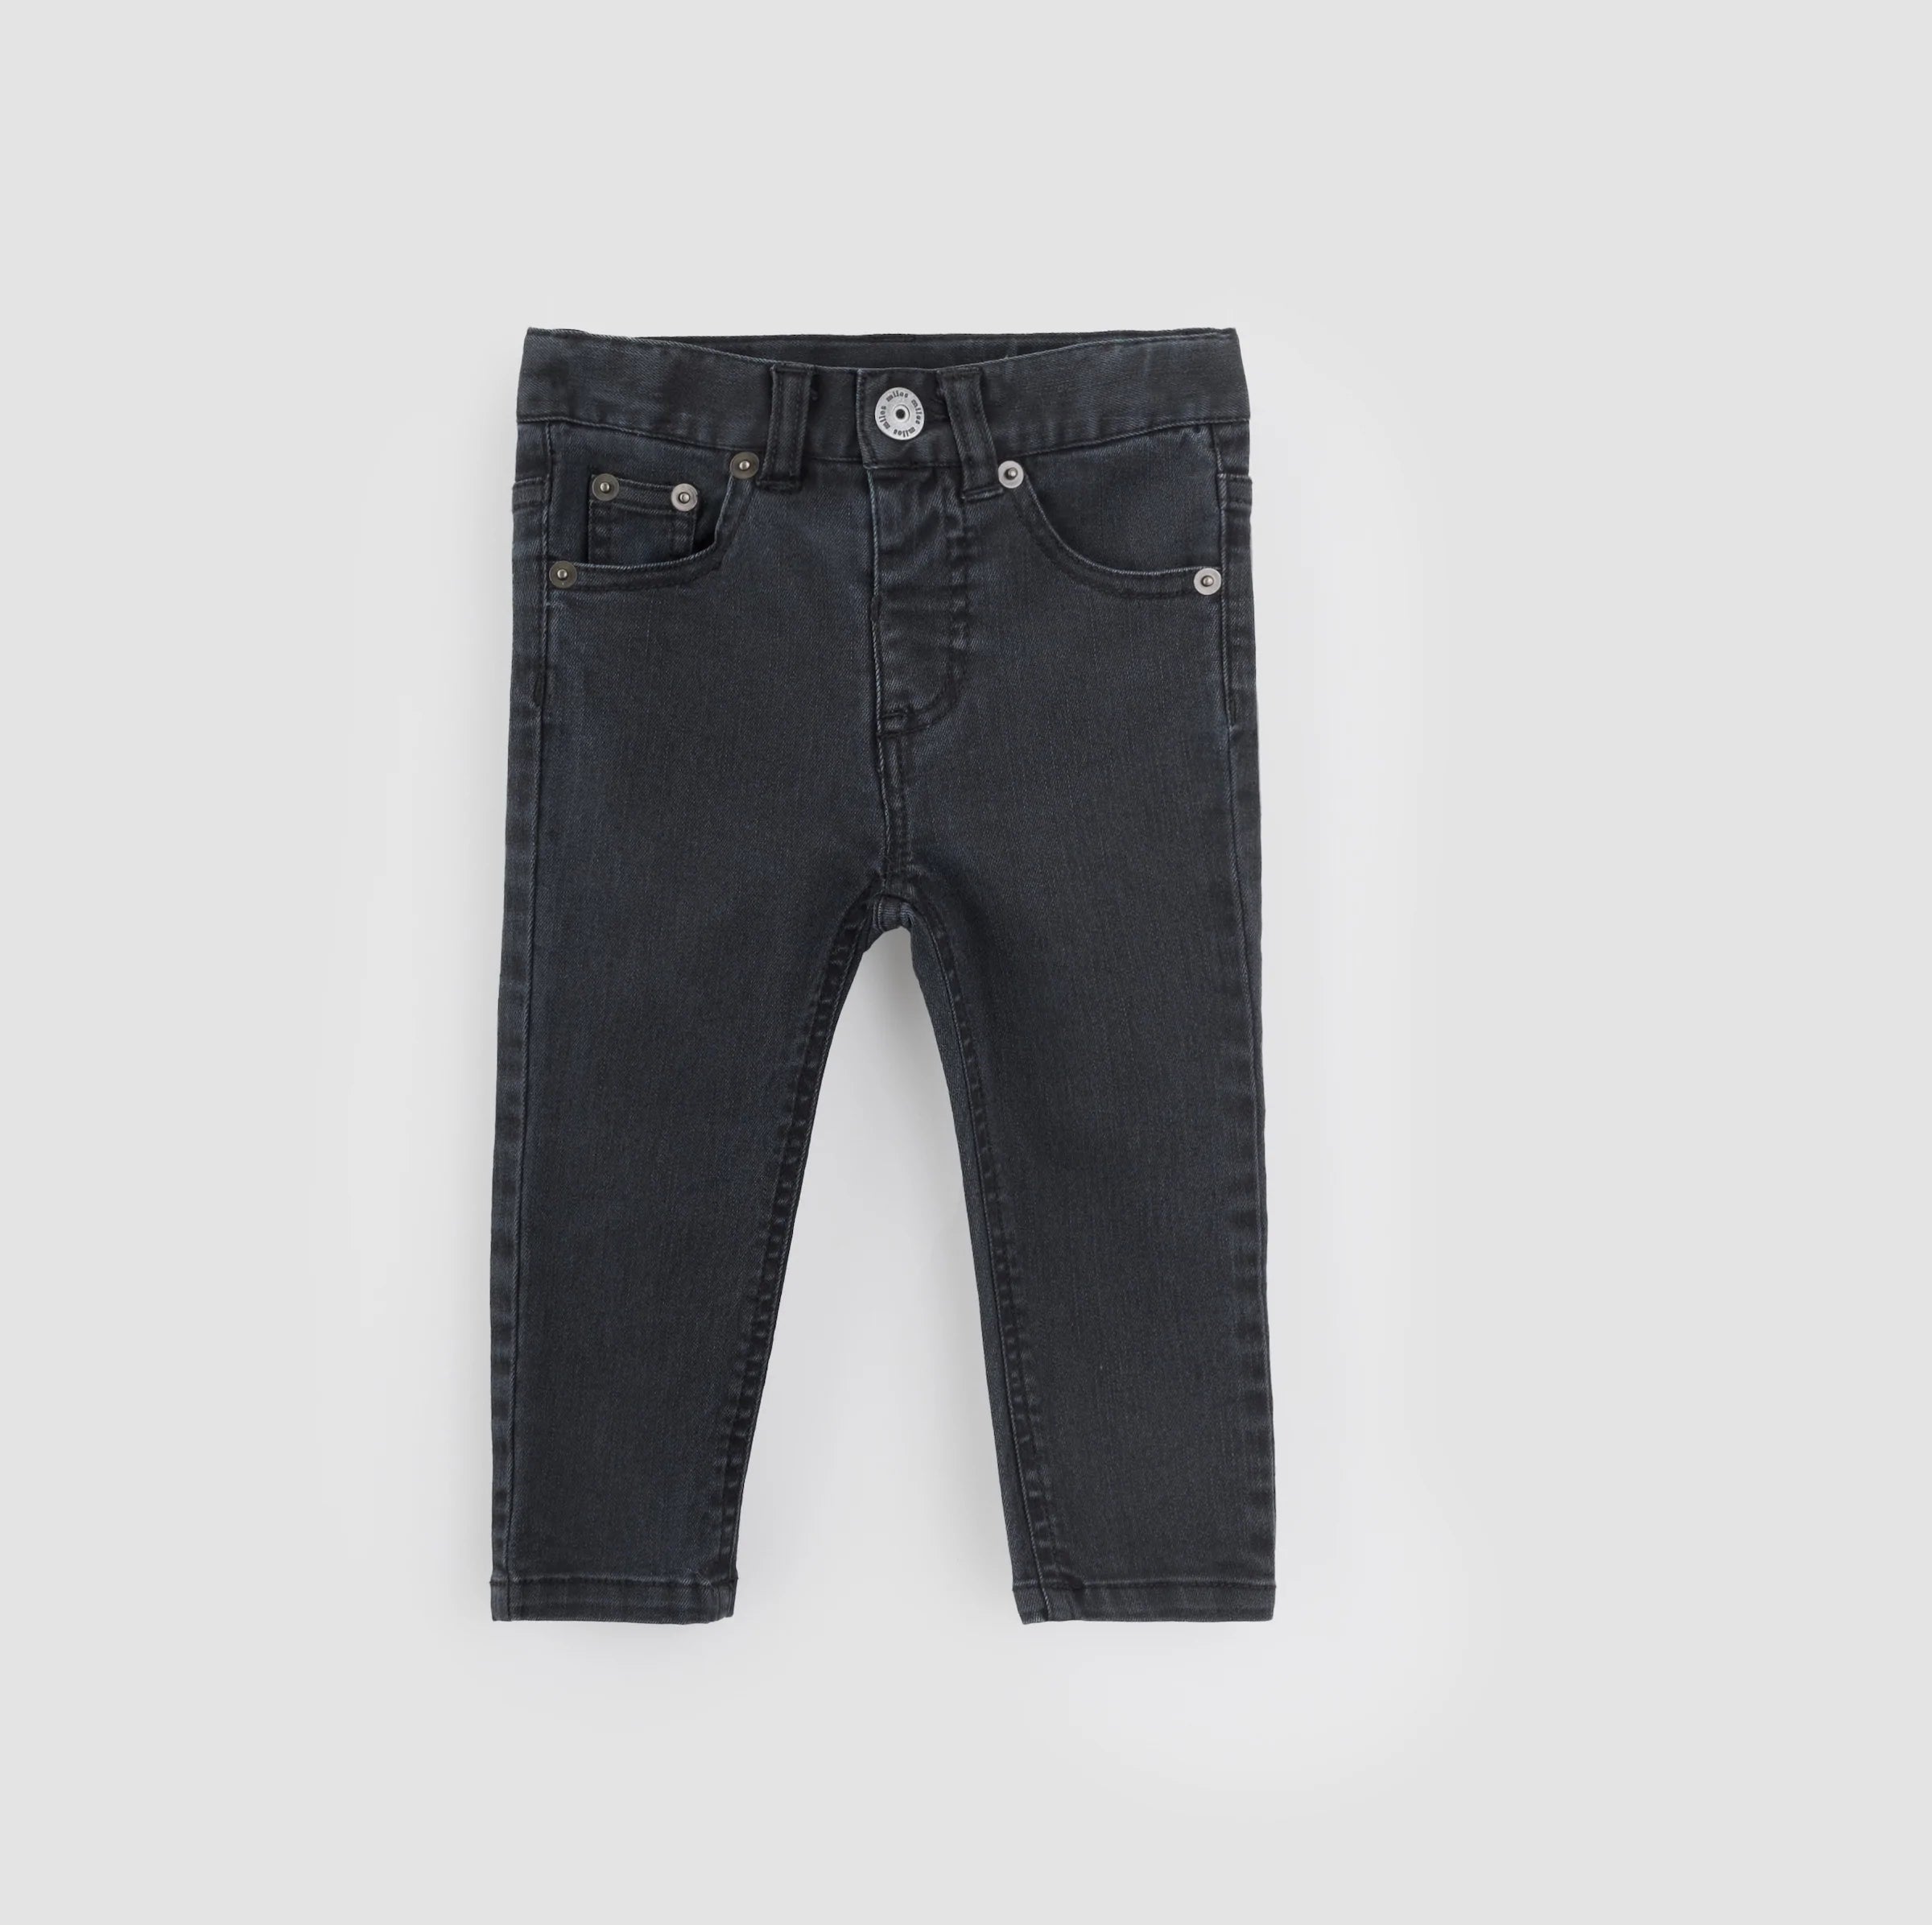 Jeans - Faded Black Eco-Stretch